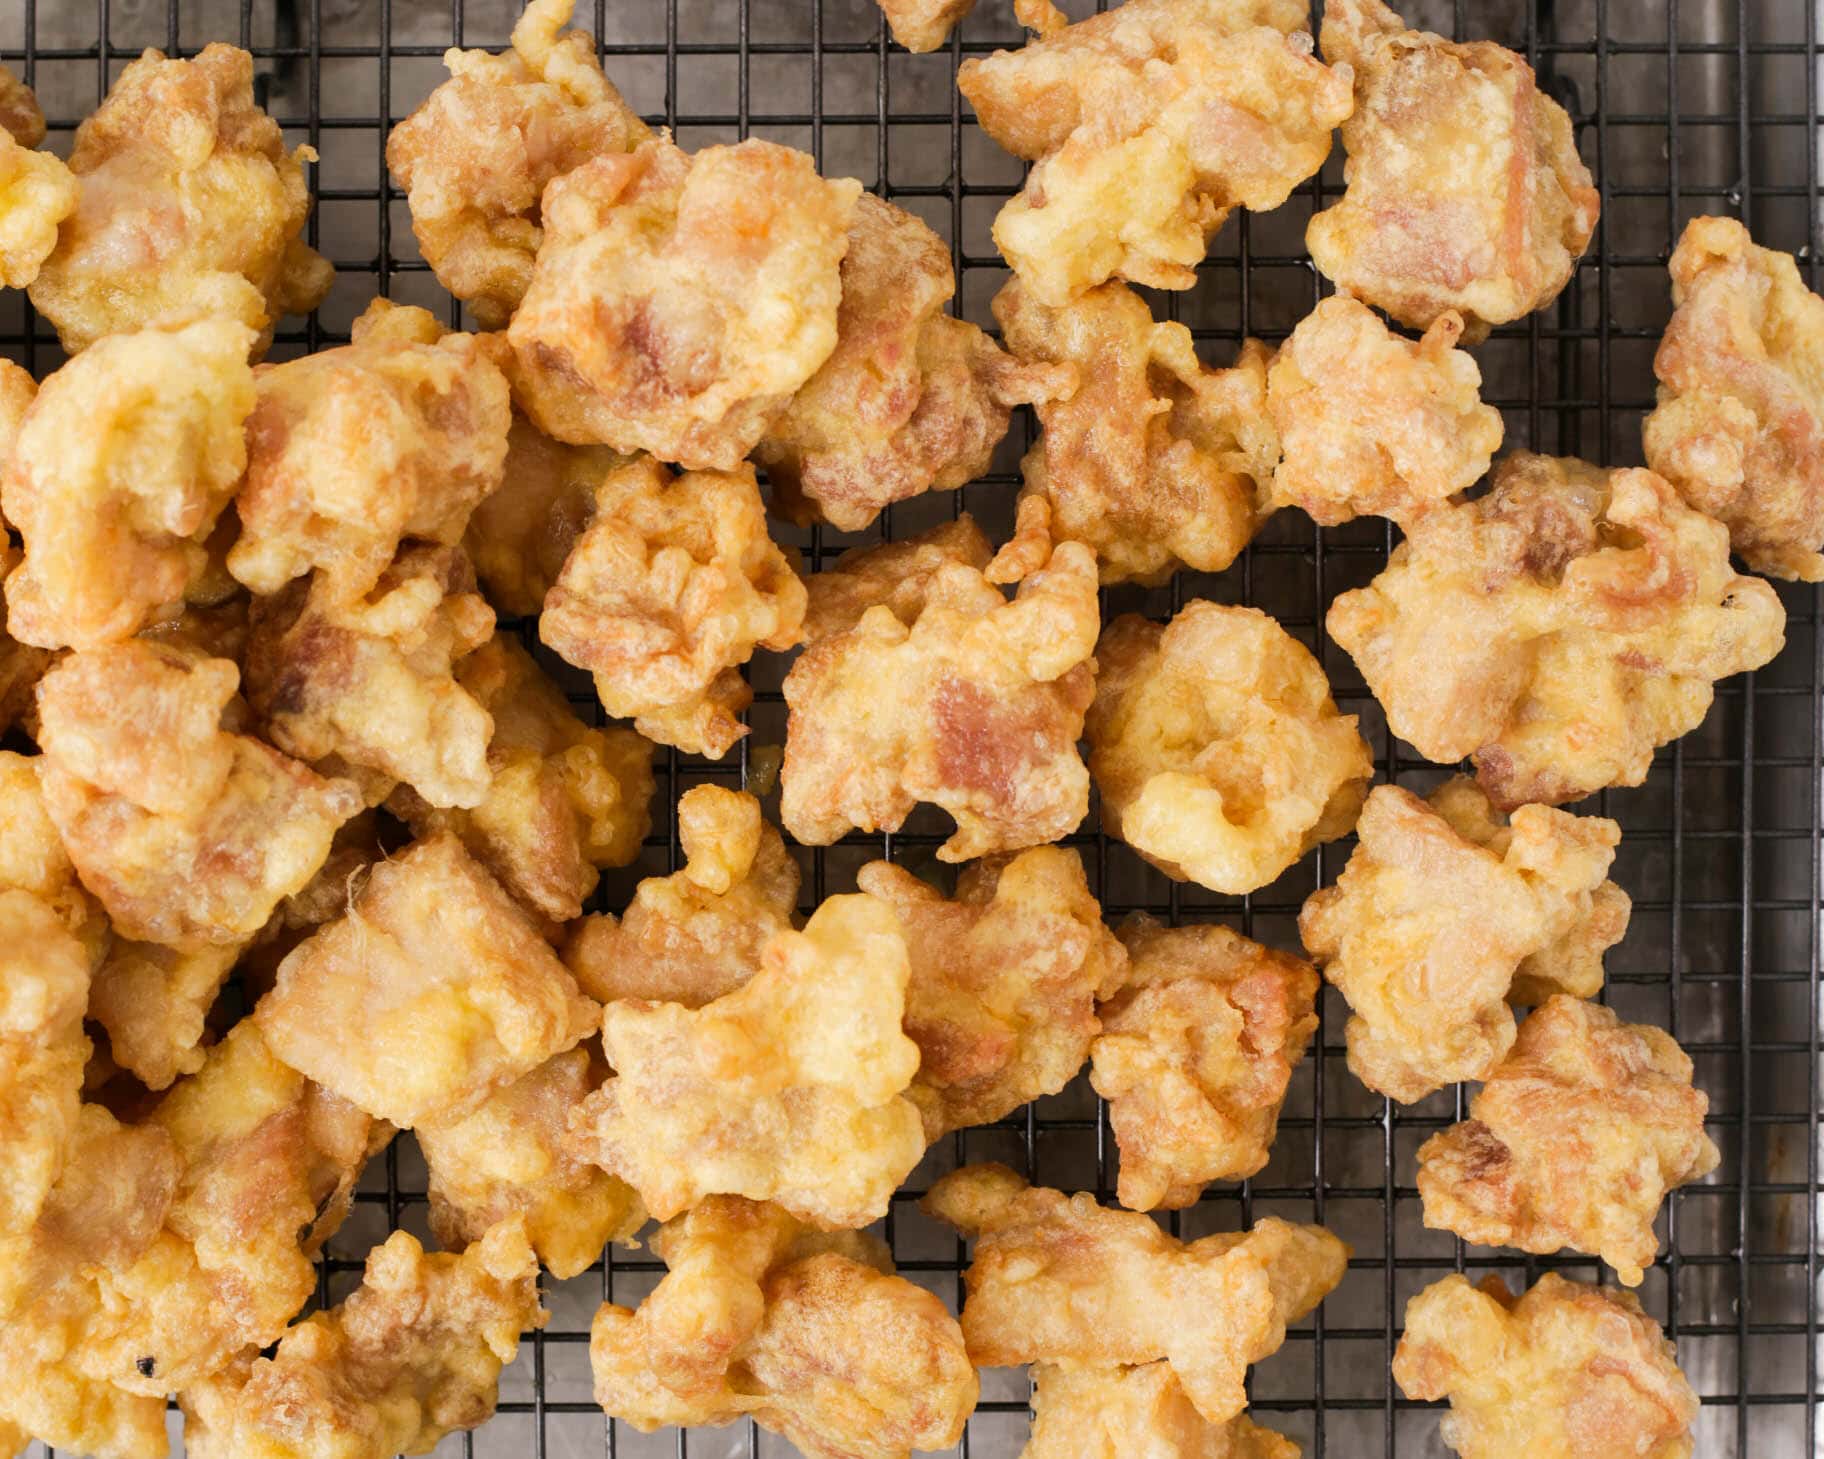 Fried chicken pieces draining on a rack after the first fry.